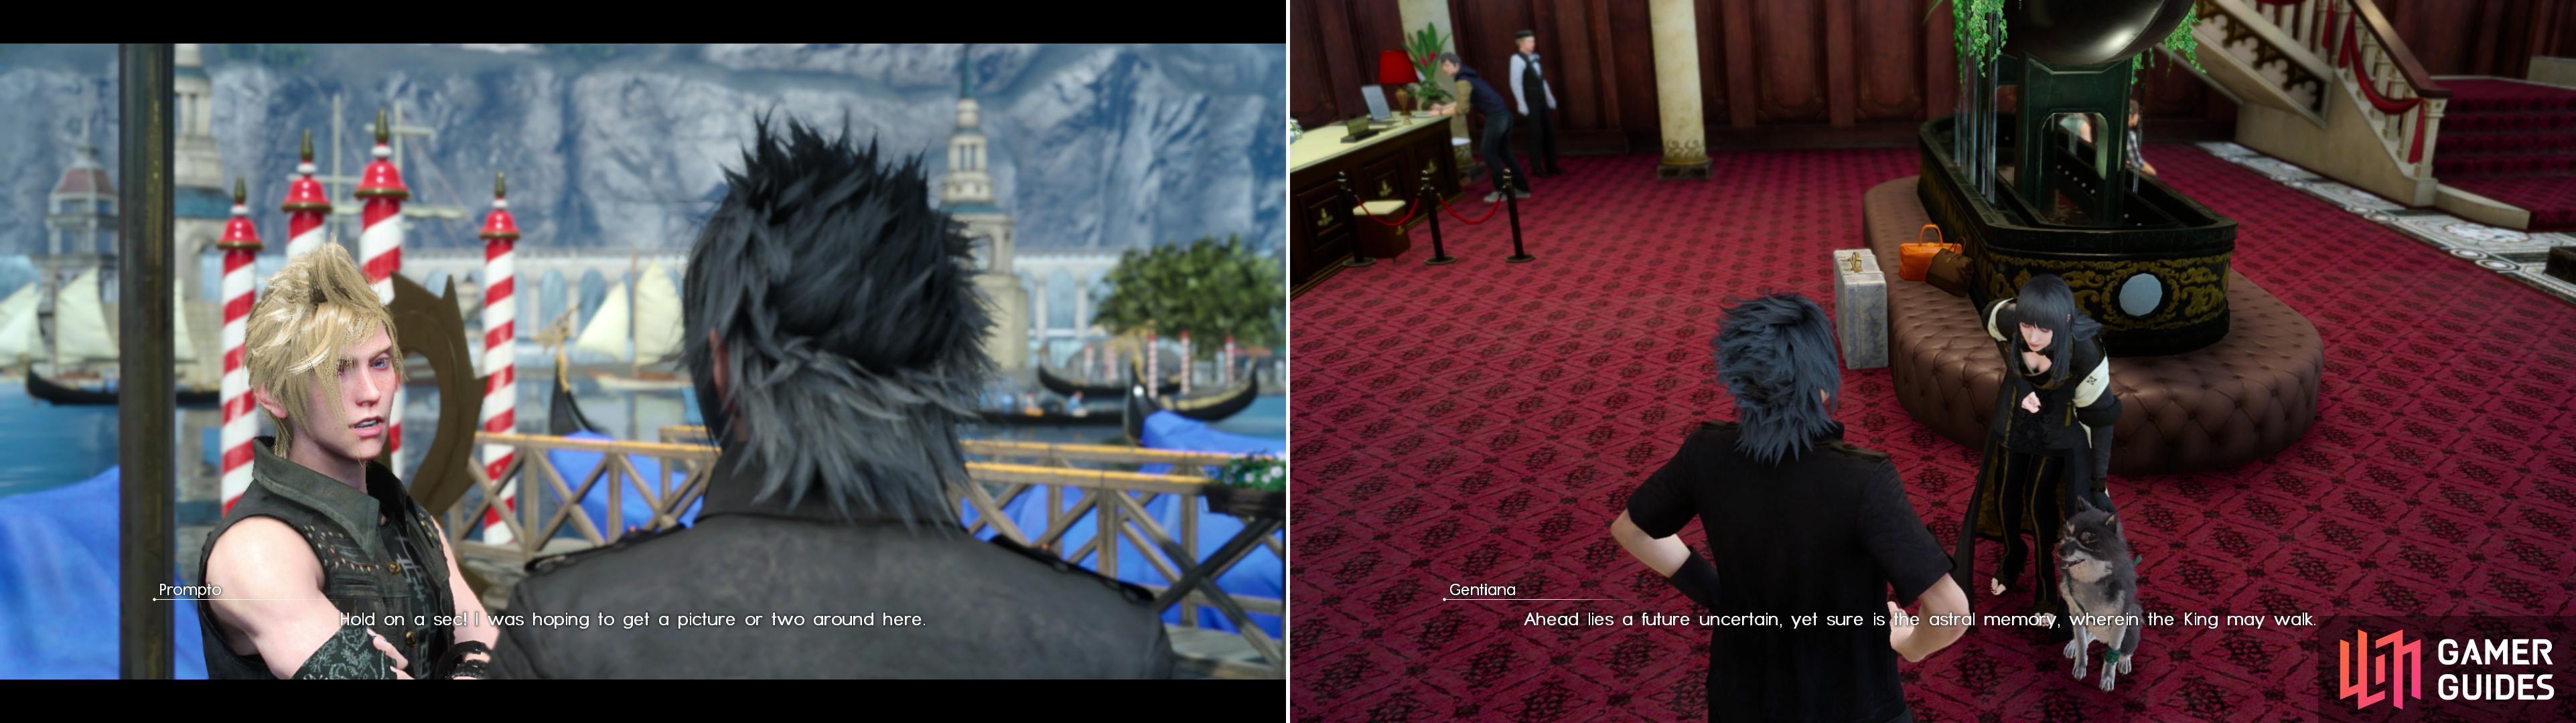 As you explore Altissia, Prompto will inform you of photo-ops around town (left). Visit The Leville to meet Gentiana, who will now allow you to use Umbra to travel between the past and present (right).